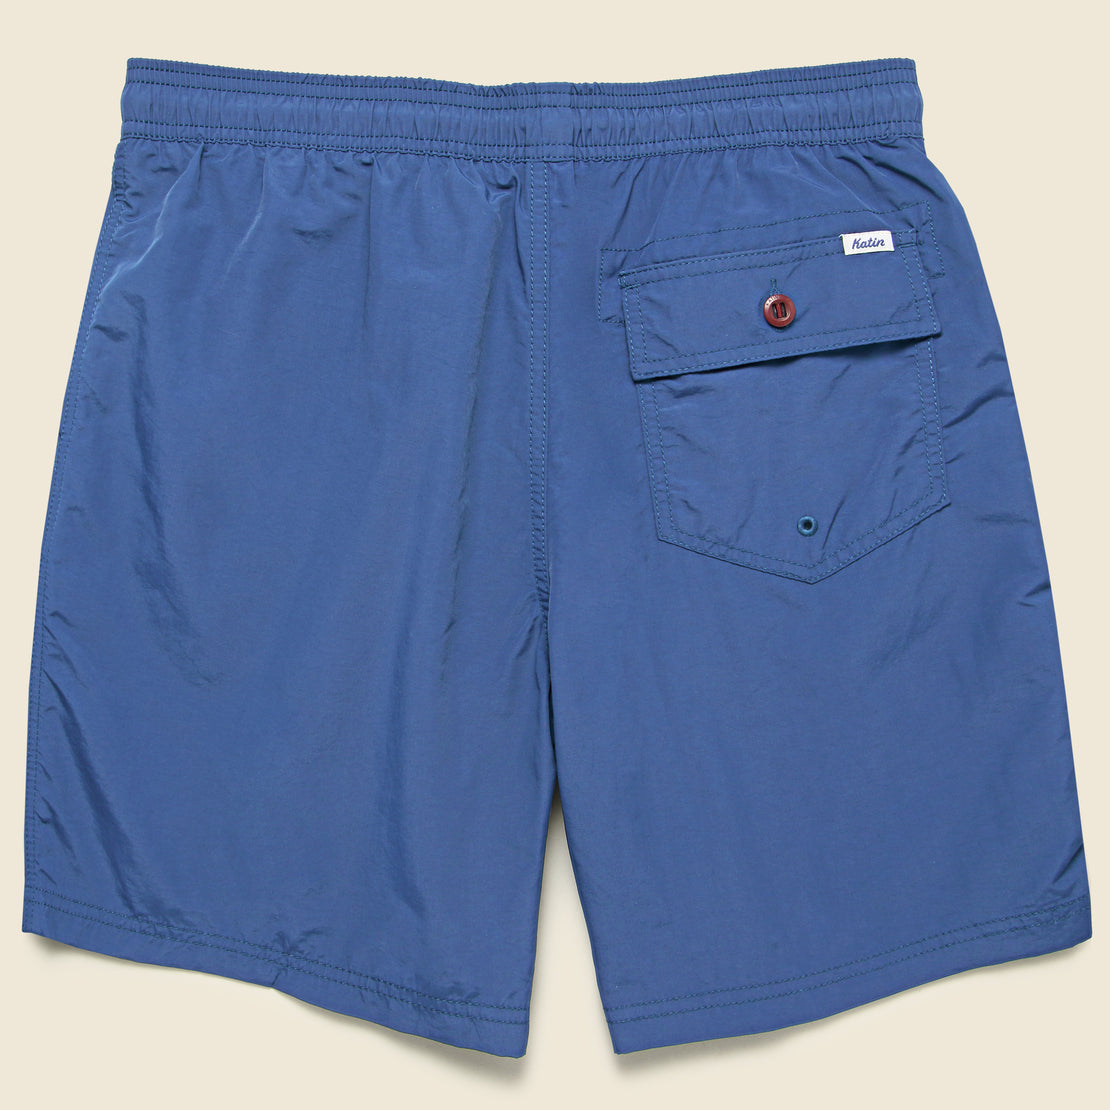 Poolside Volley Trunk - Bay Blue